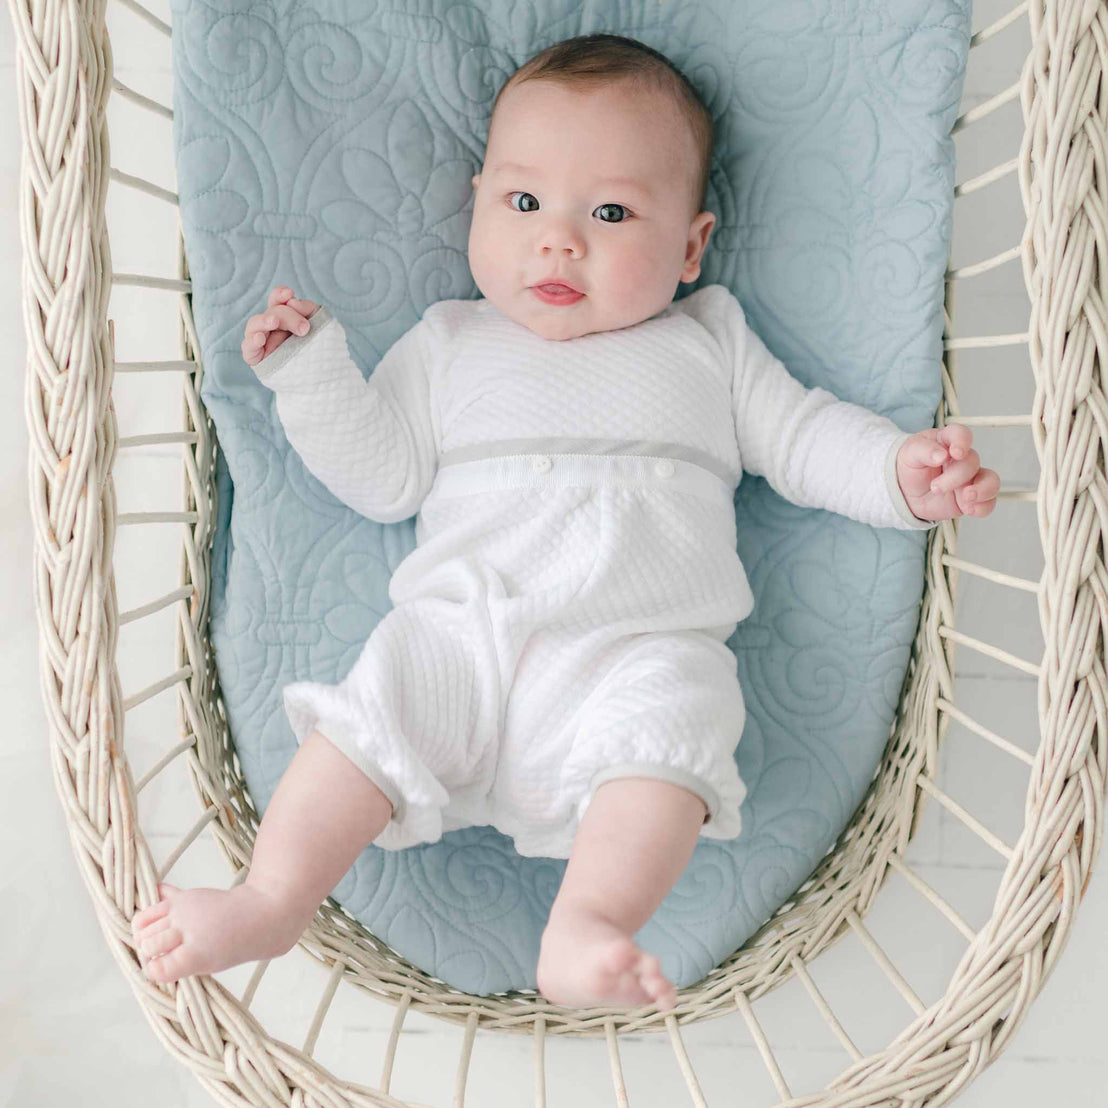 A baby dressed in a Grayson Quilted Romper lies on a light blue quilted blanket inside a woven basket. The baby looks up with wide eyes and slightly raised arms. The environment appears soft and cozy.